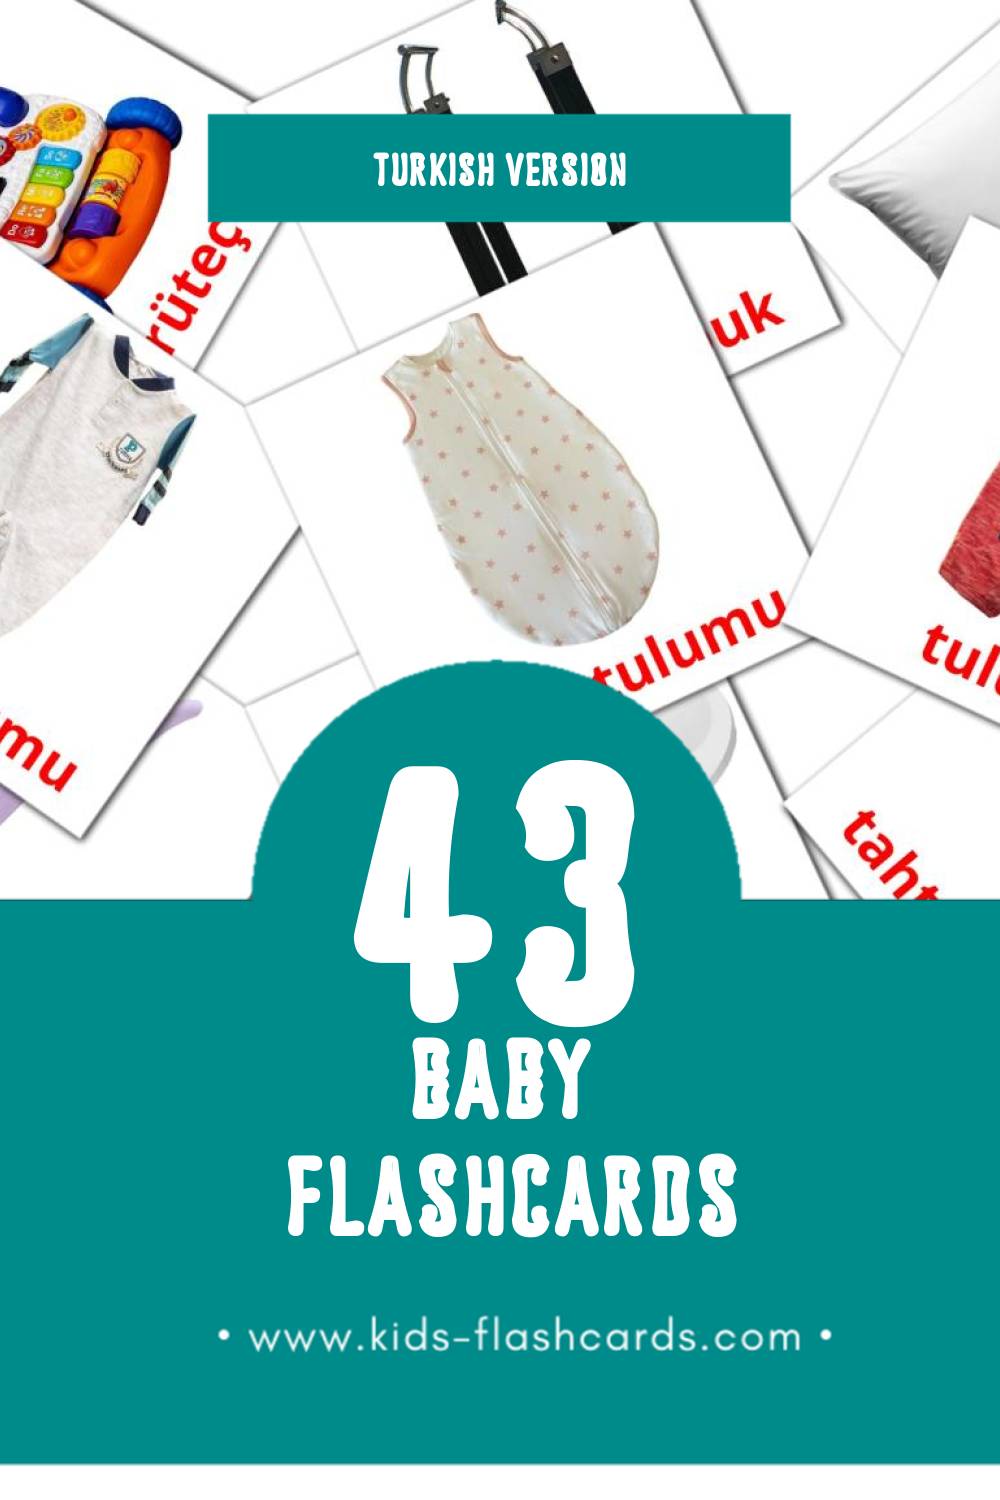 Visual Bebek Flashcards for Toddlers (45 cards in Turkish)